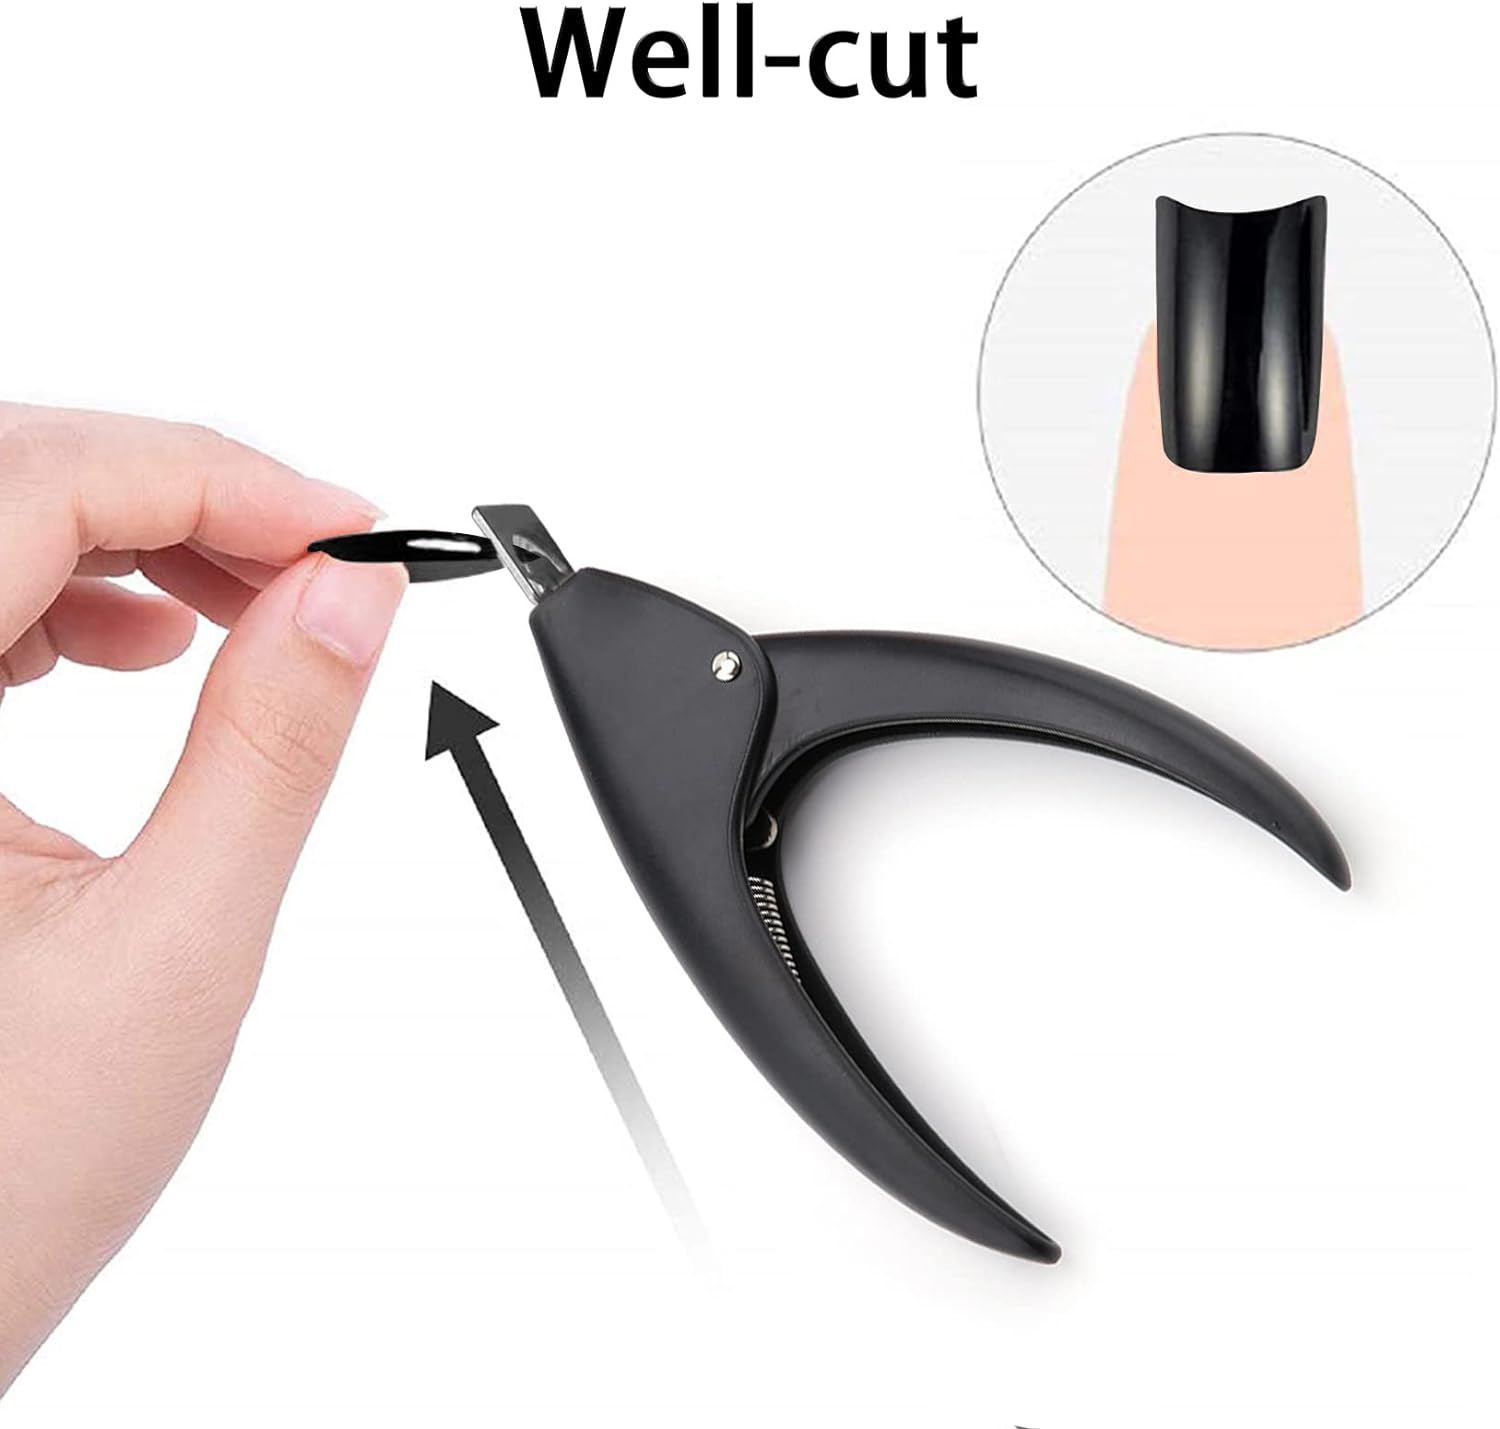 JeoPoom Tipcutter, Nail Clippers, Artificial Nail Clippers, Nail Tips Clipper, for Natural and Artificial Nails, for Nail Studio and Home Use (Black)